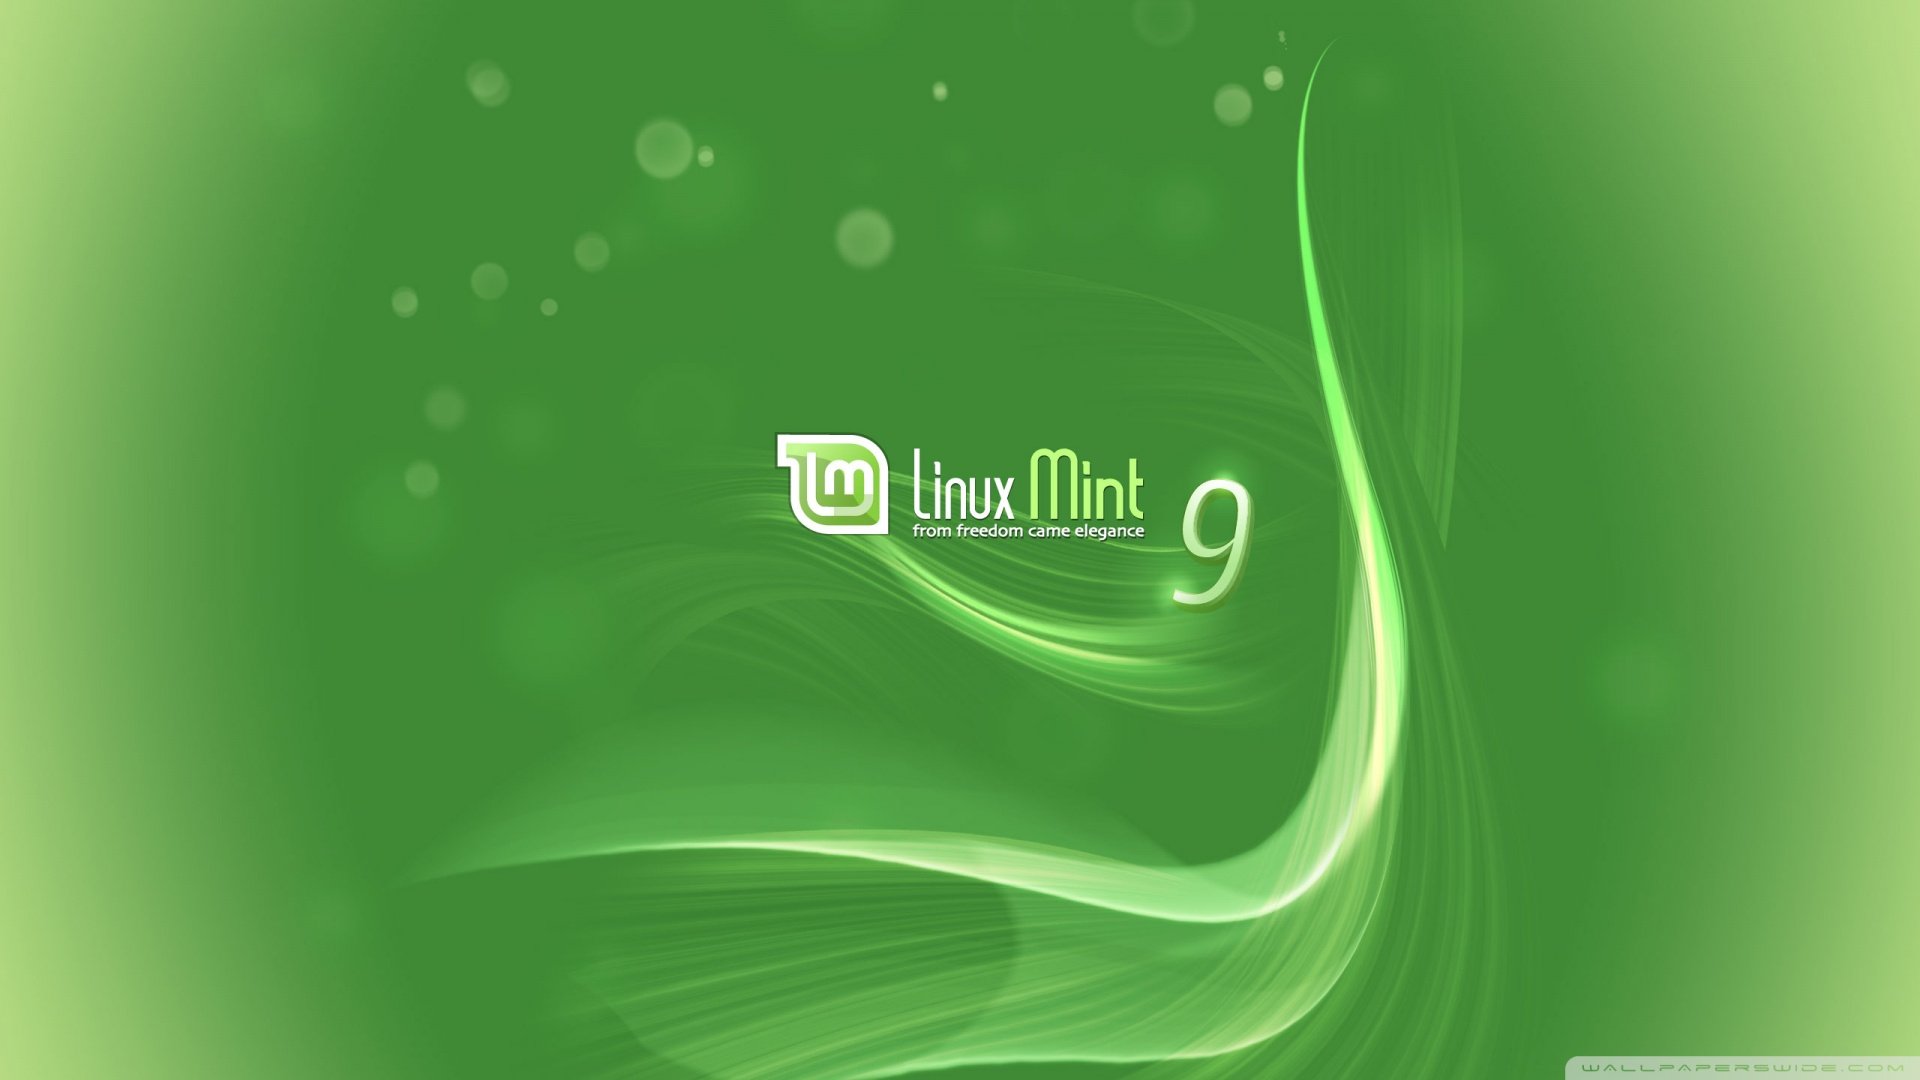 Red Linux Mint Wallpapers